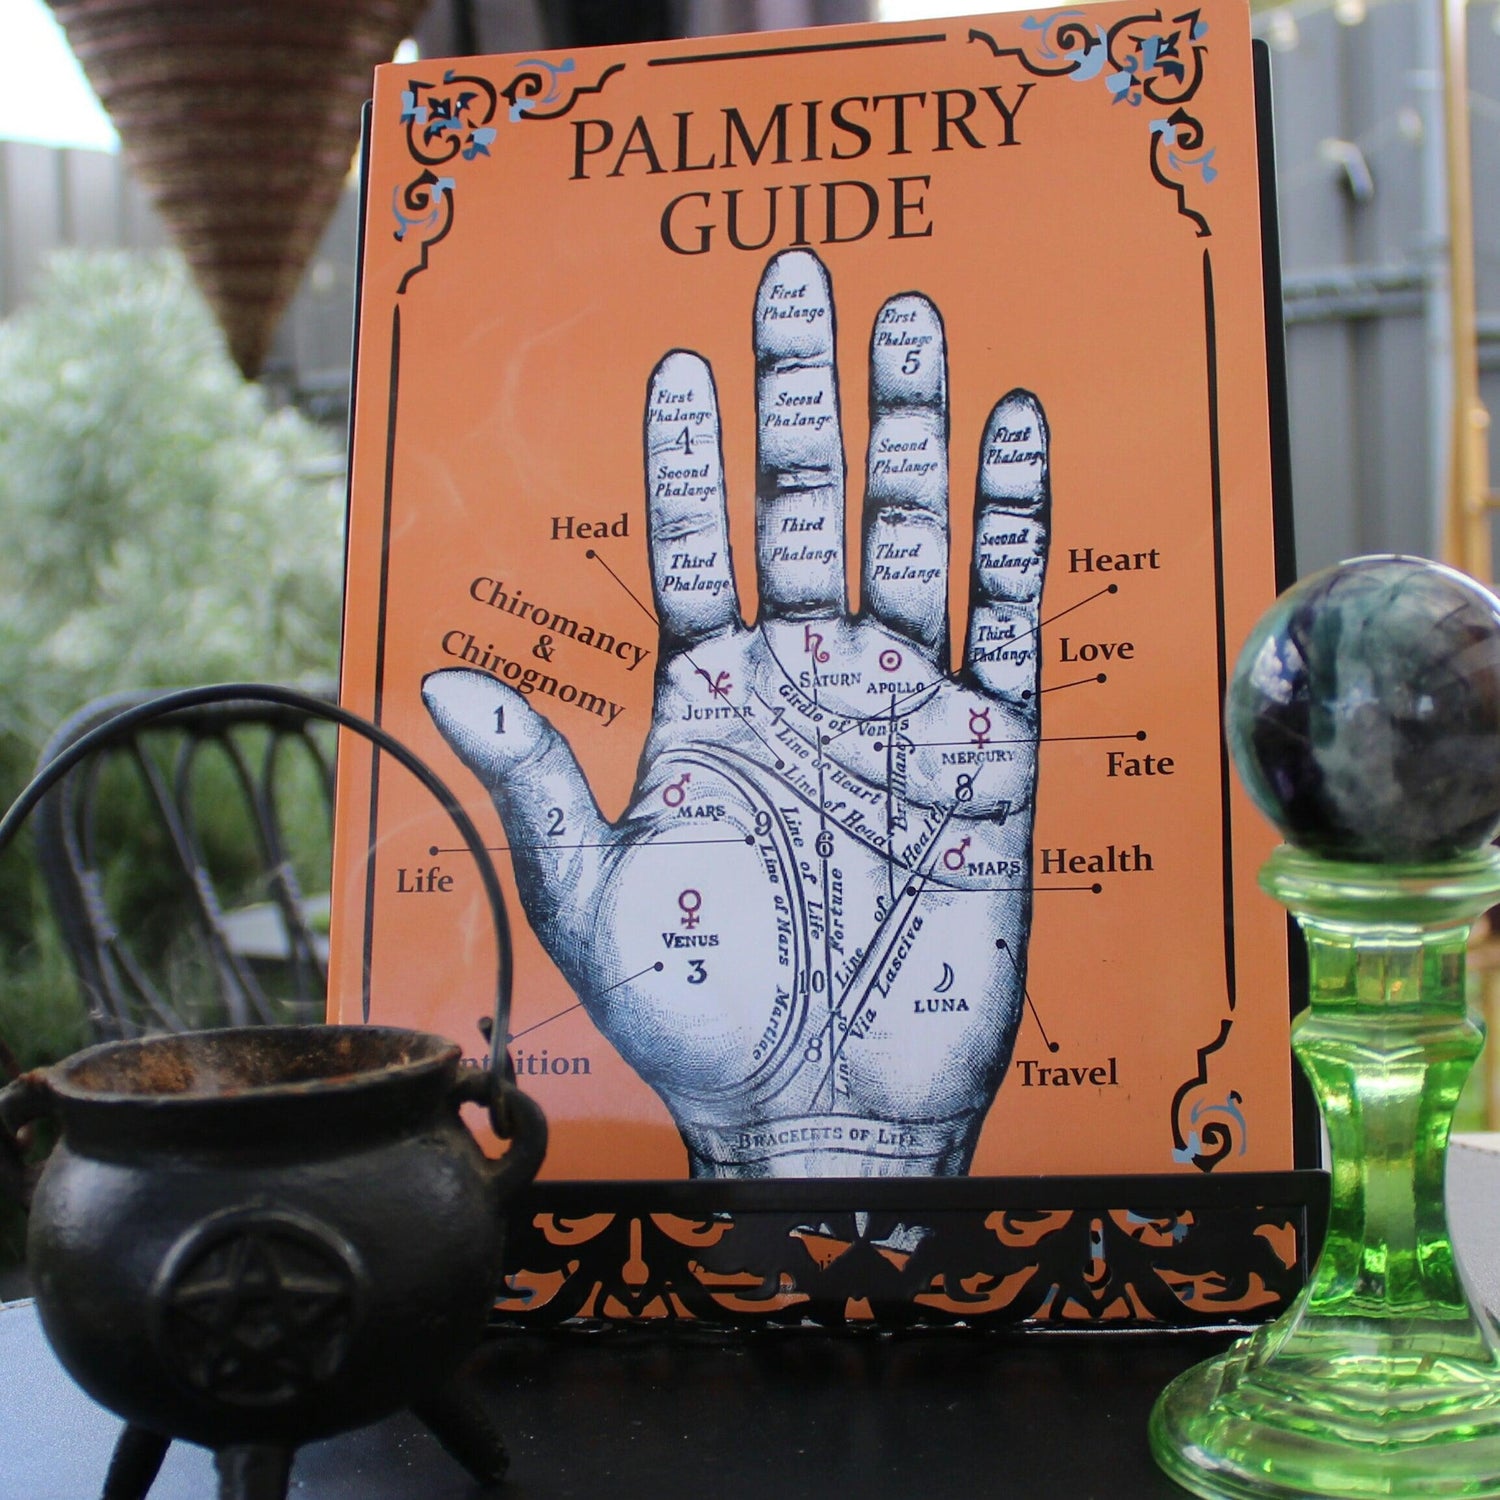 Palmistry Guide (Aracaria) - JOURNEY artisan soaps & candles